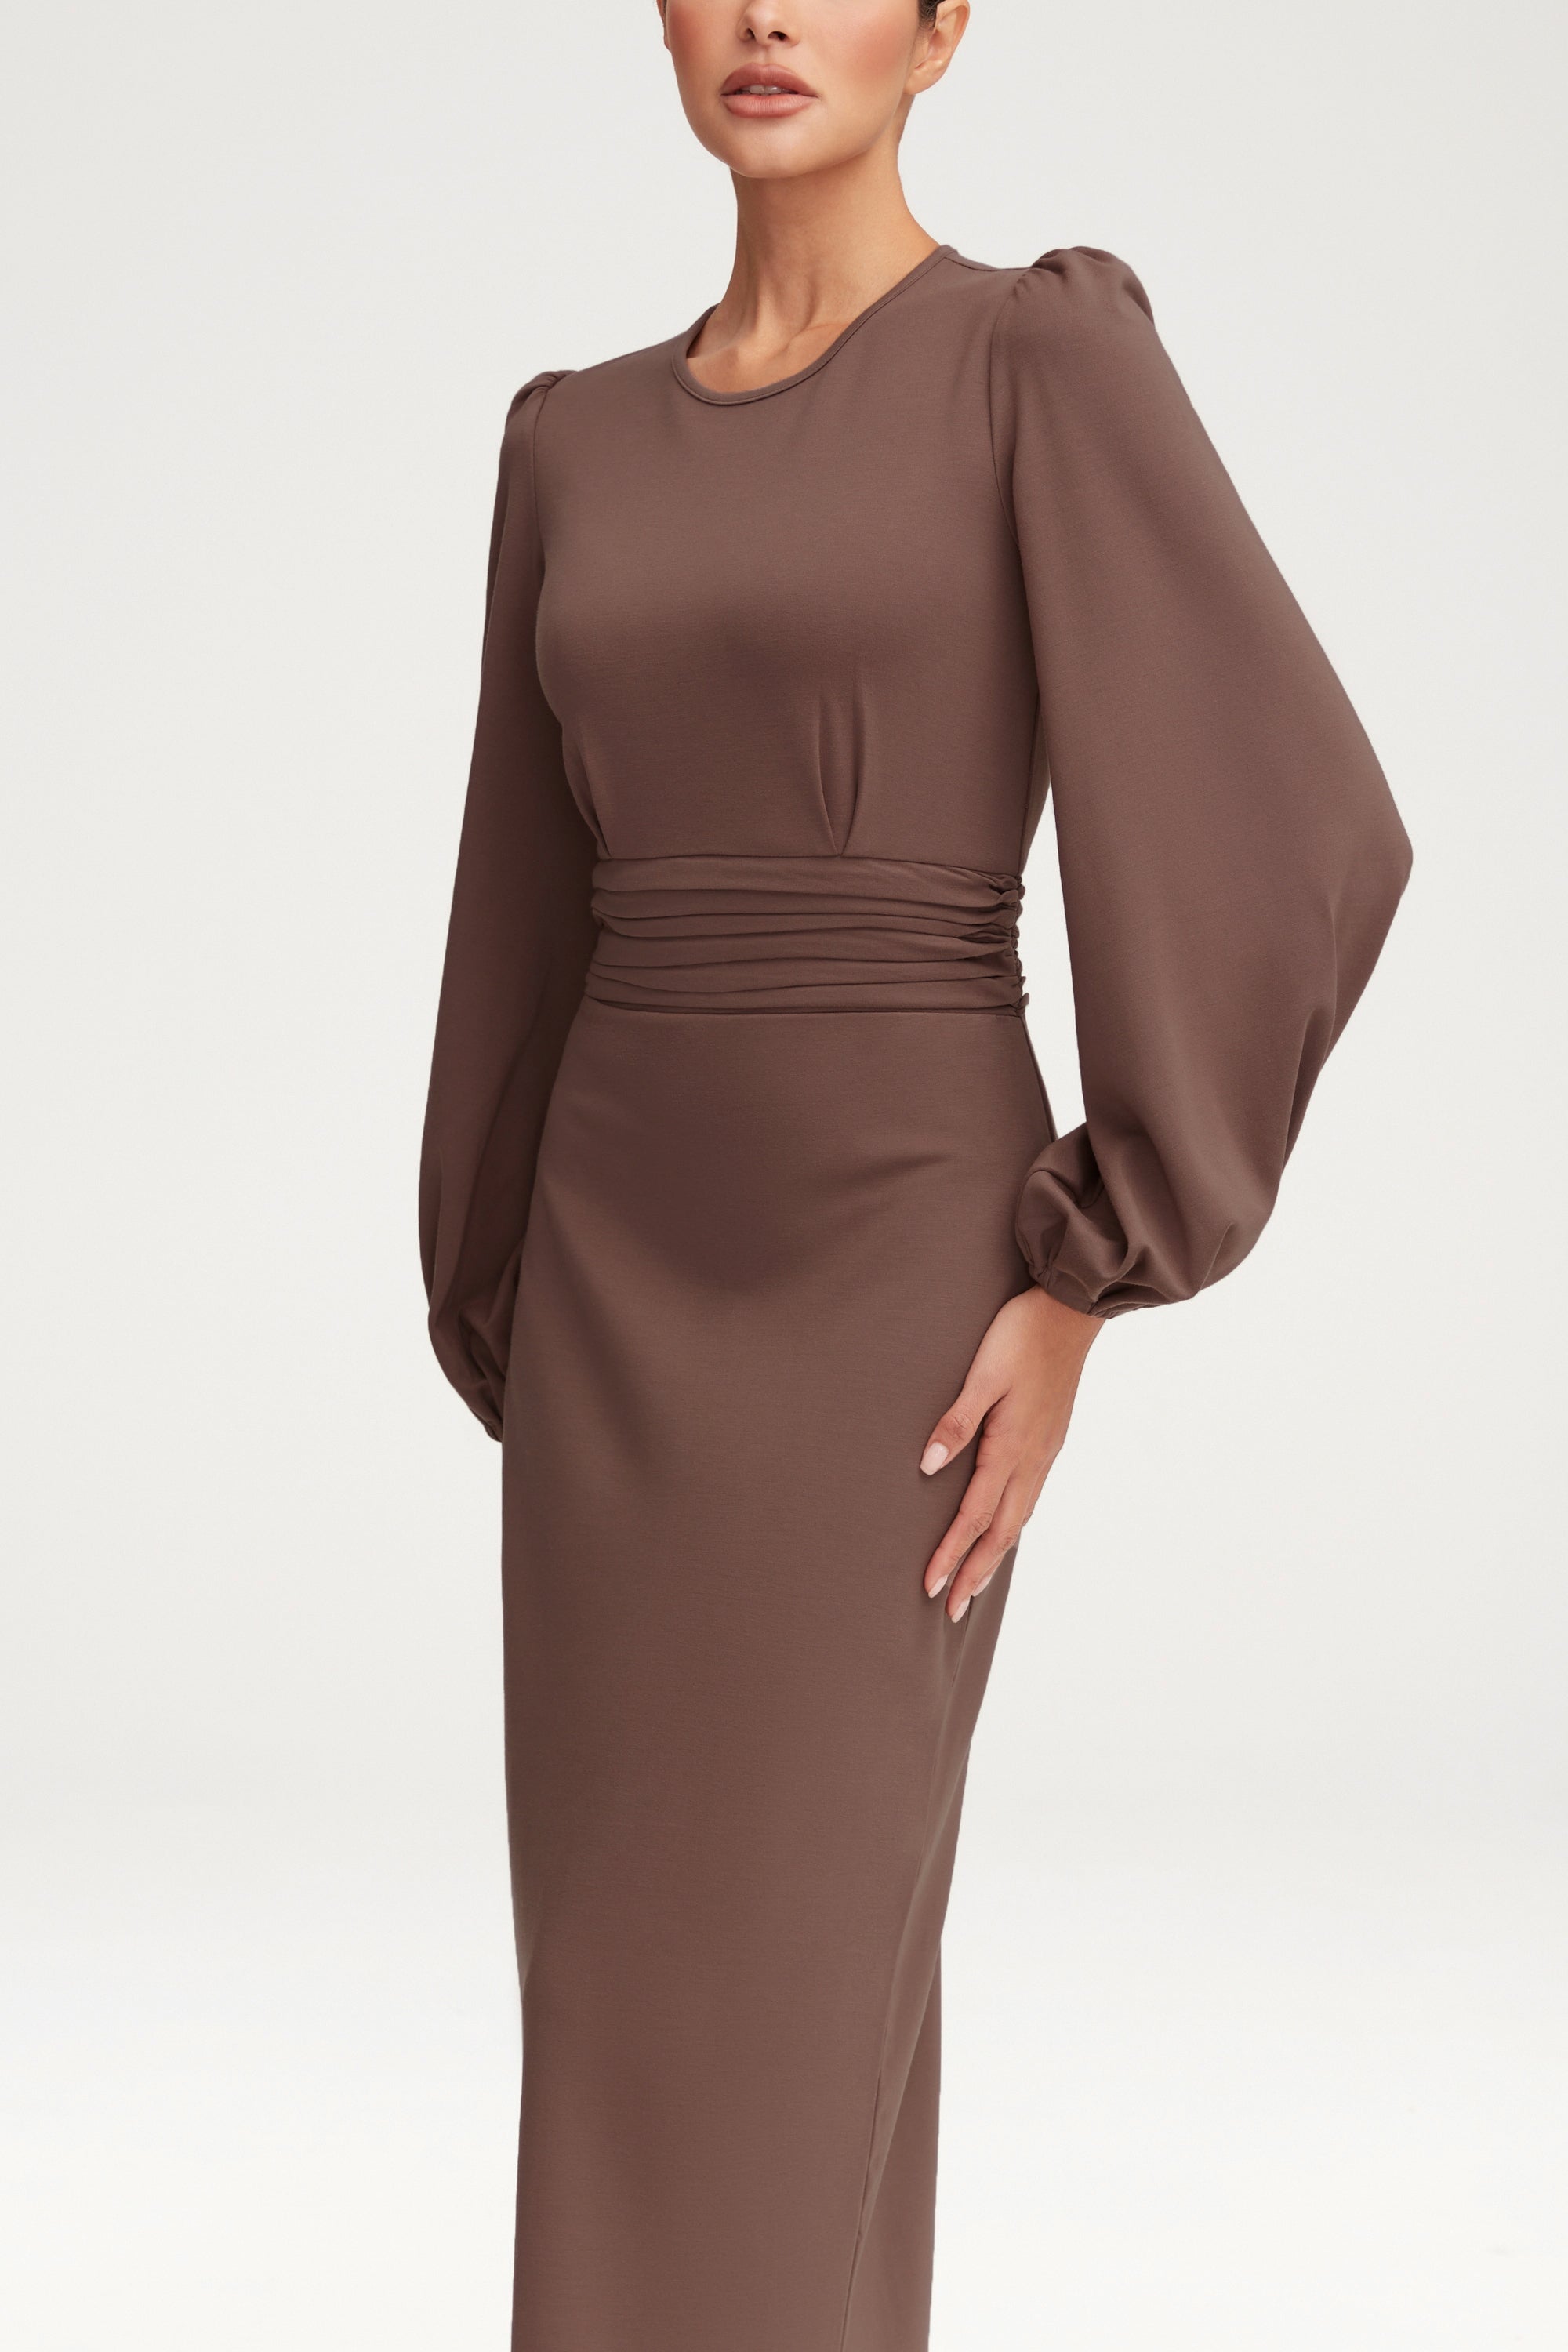 Elisa Jersey Rouched Waist Maxi Dress - Dark Taupe Clothing epschoolboard 